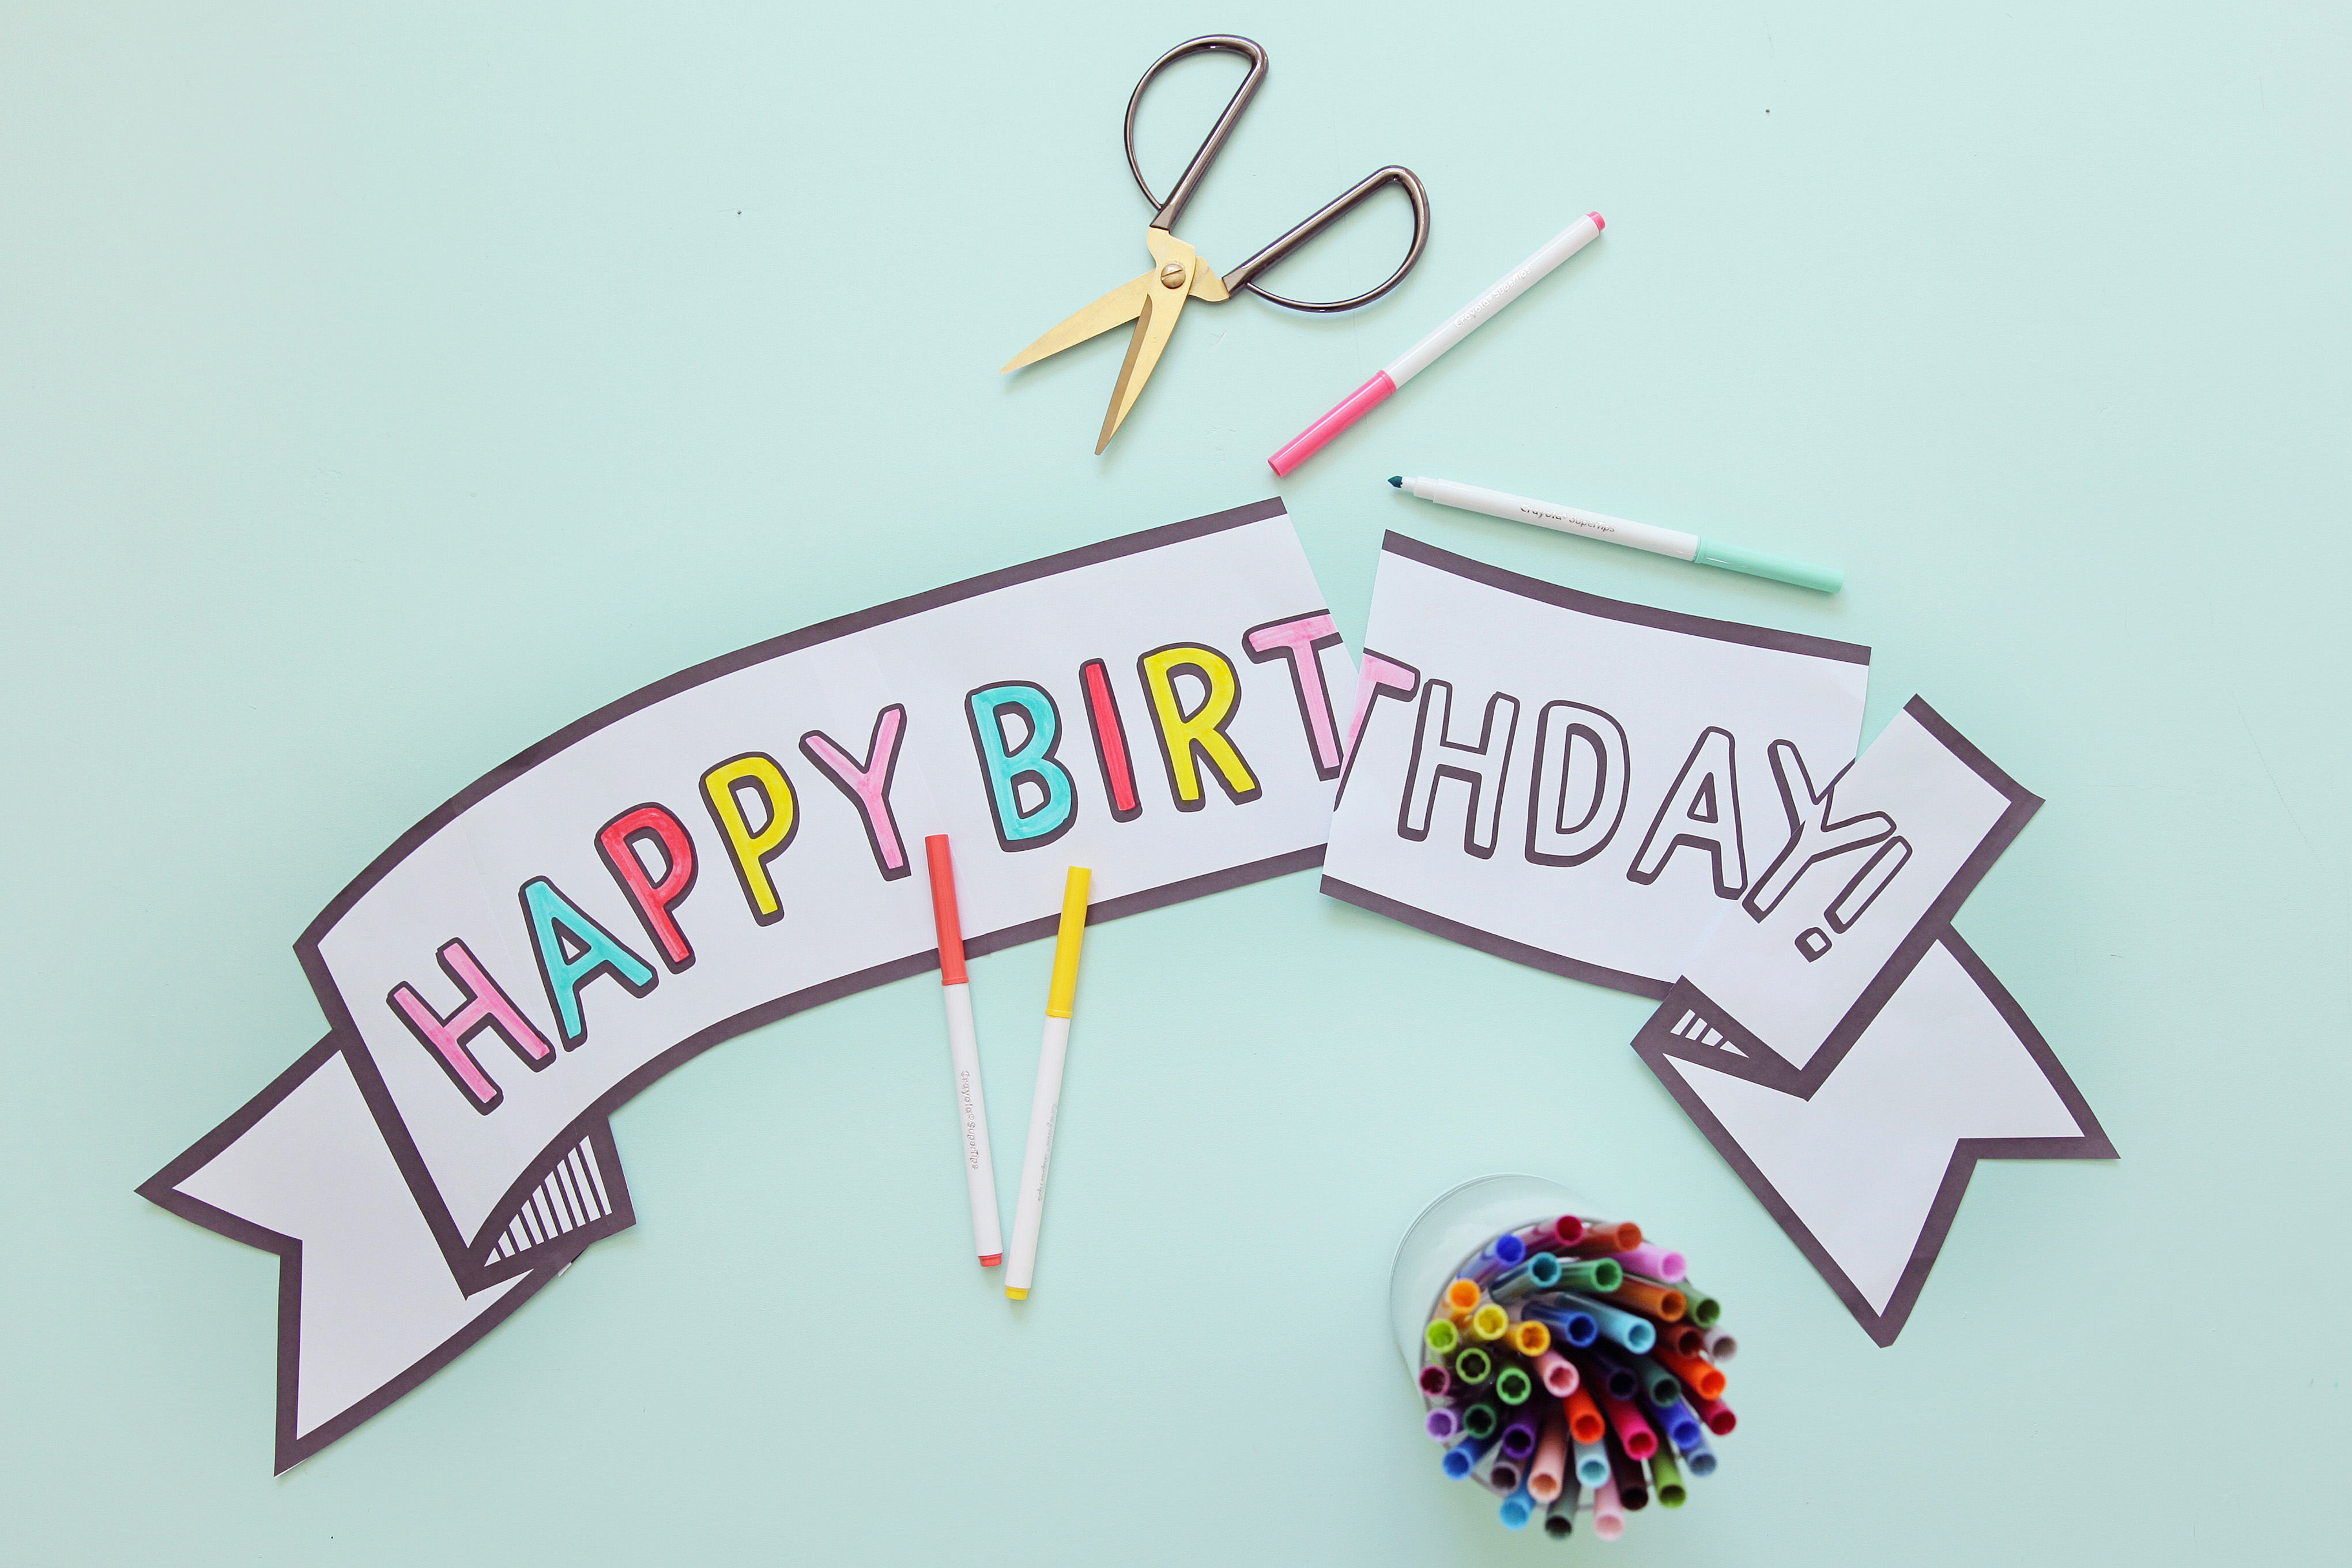 This birthday banner can be printed right at HOME! Takes only 5 min to make, you will never be stressed on birthday decor again.